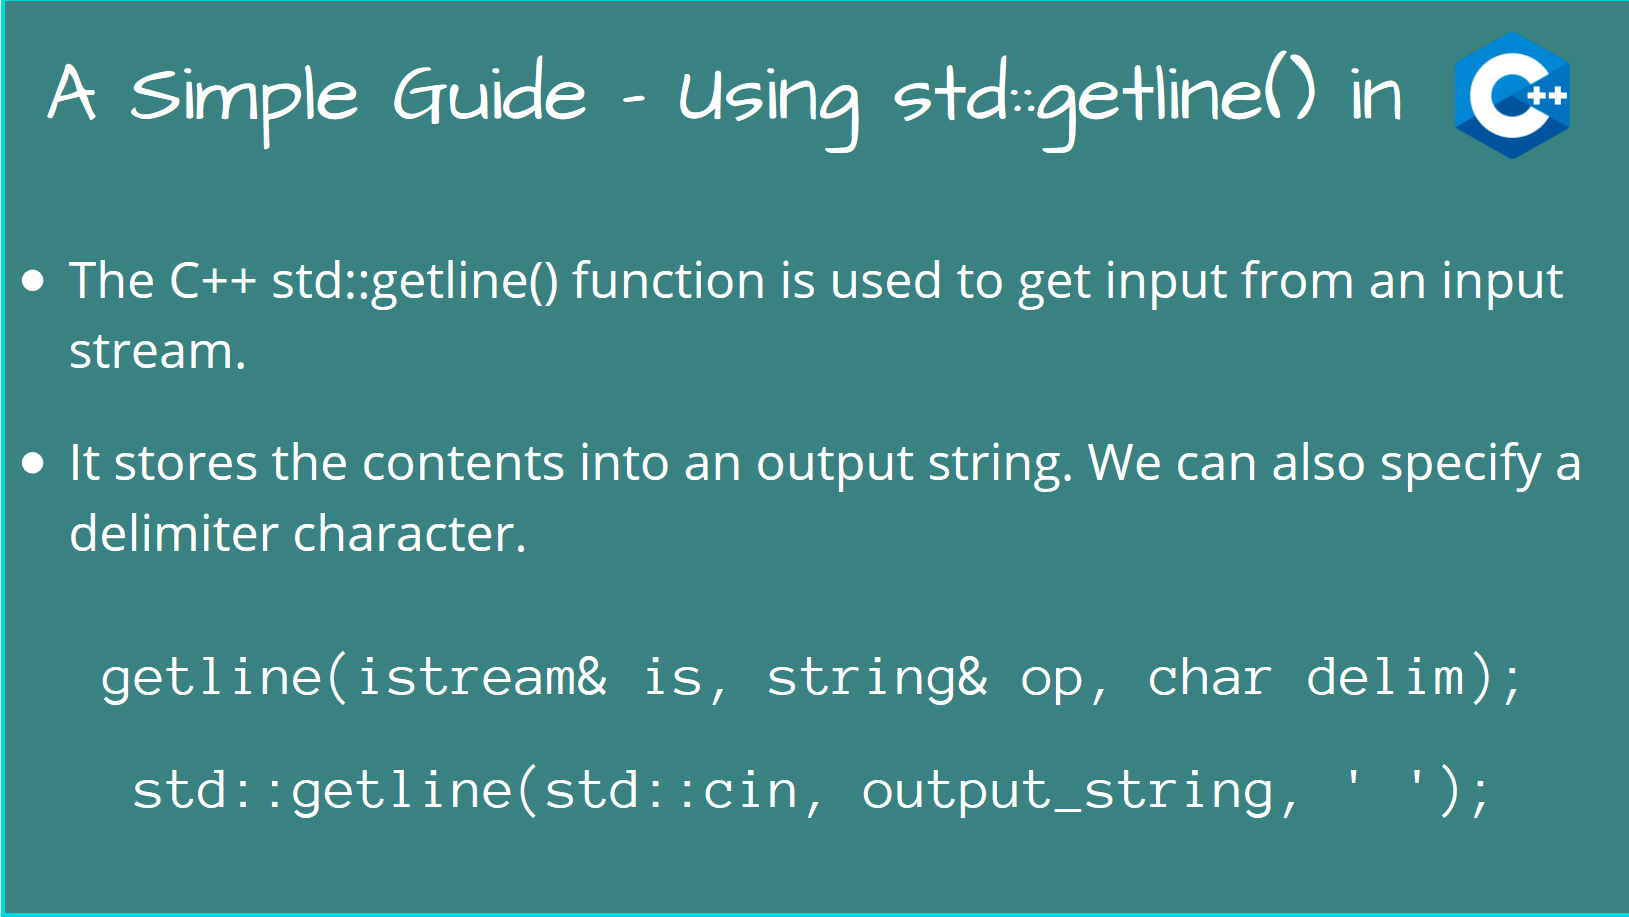 How to use std::getline() in C++?